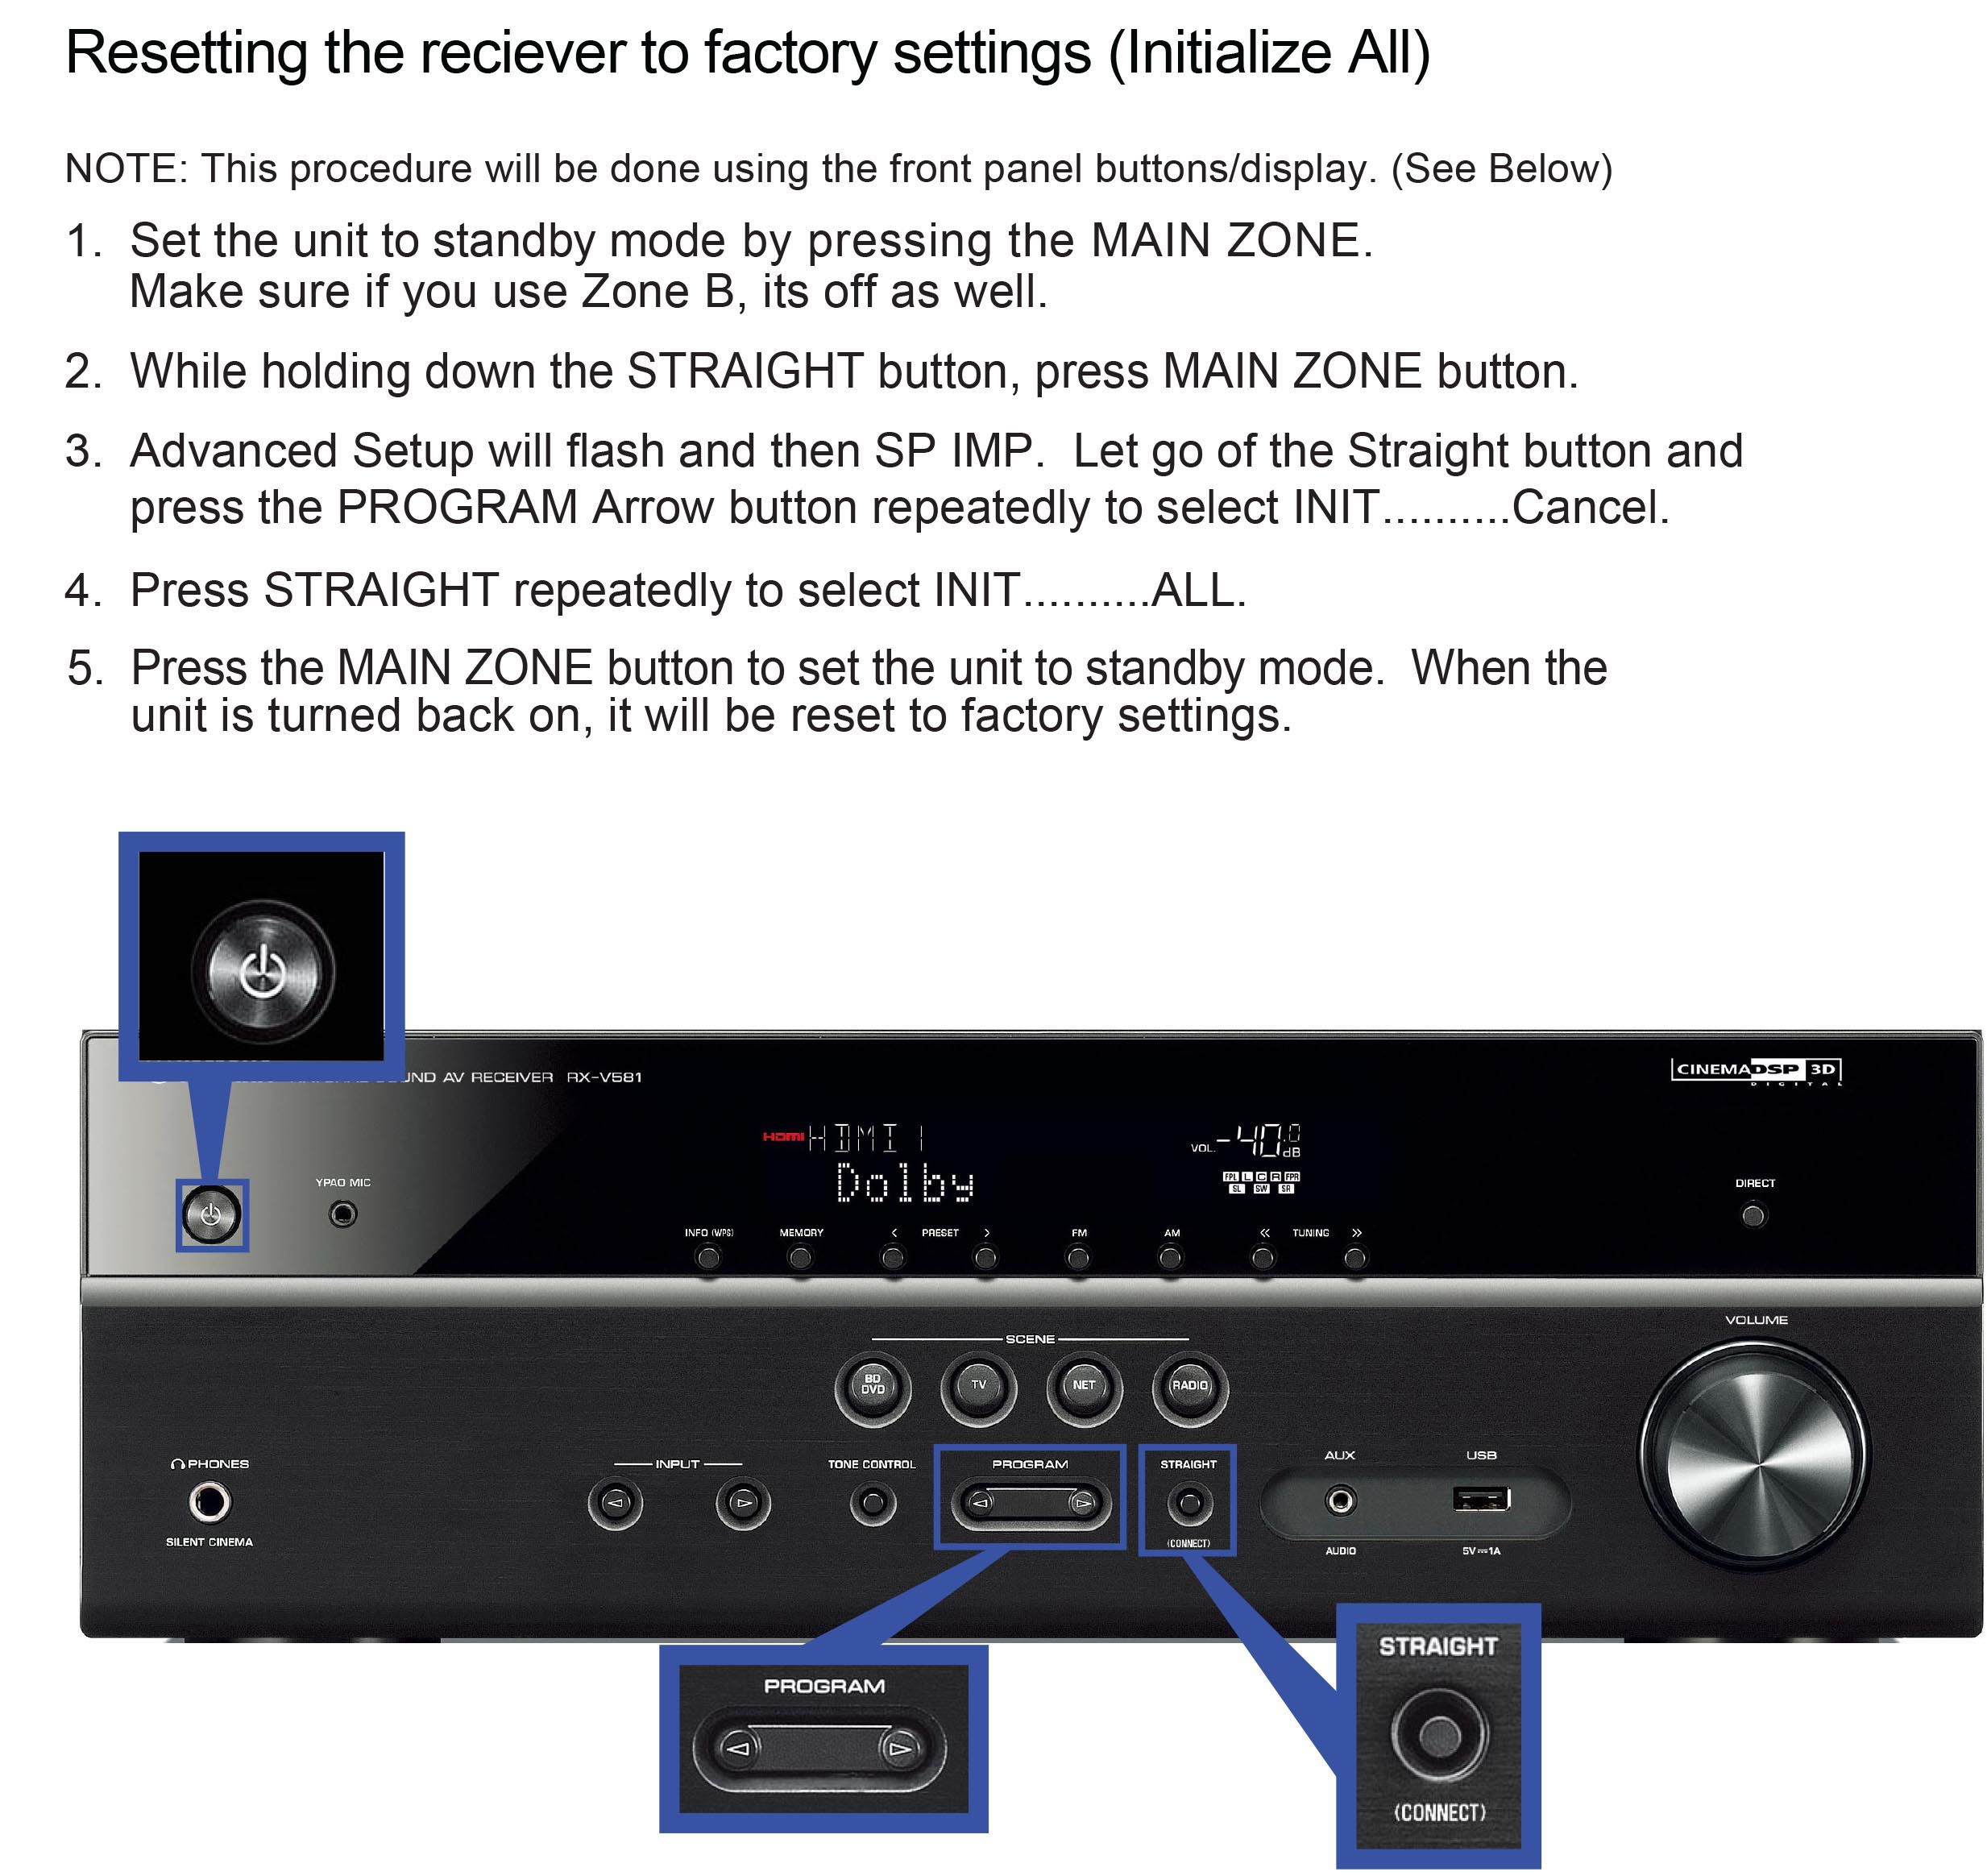 RX-V481 Resetting the receiver to factory settings (Initialize All